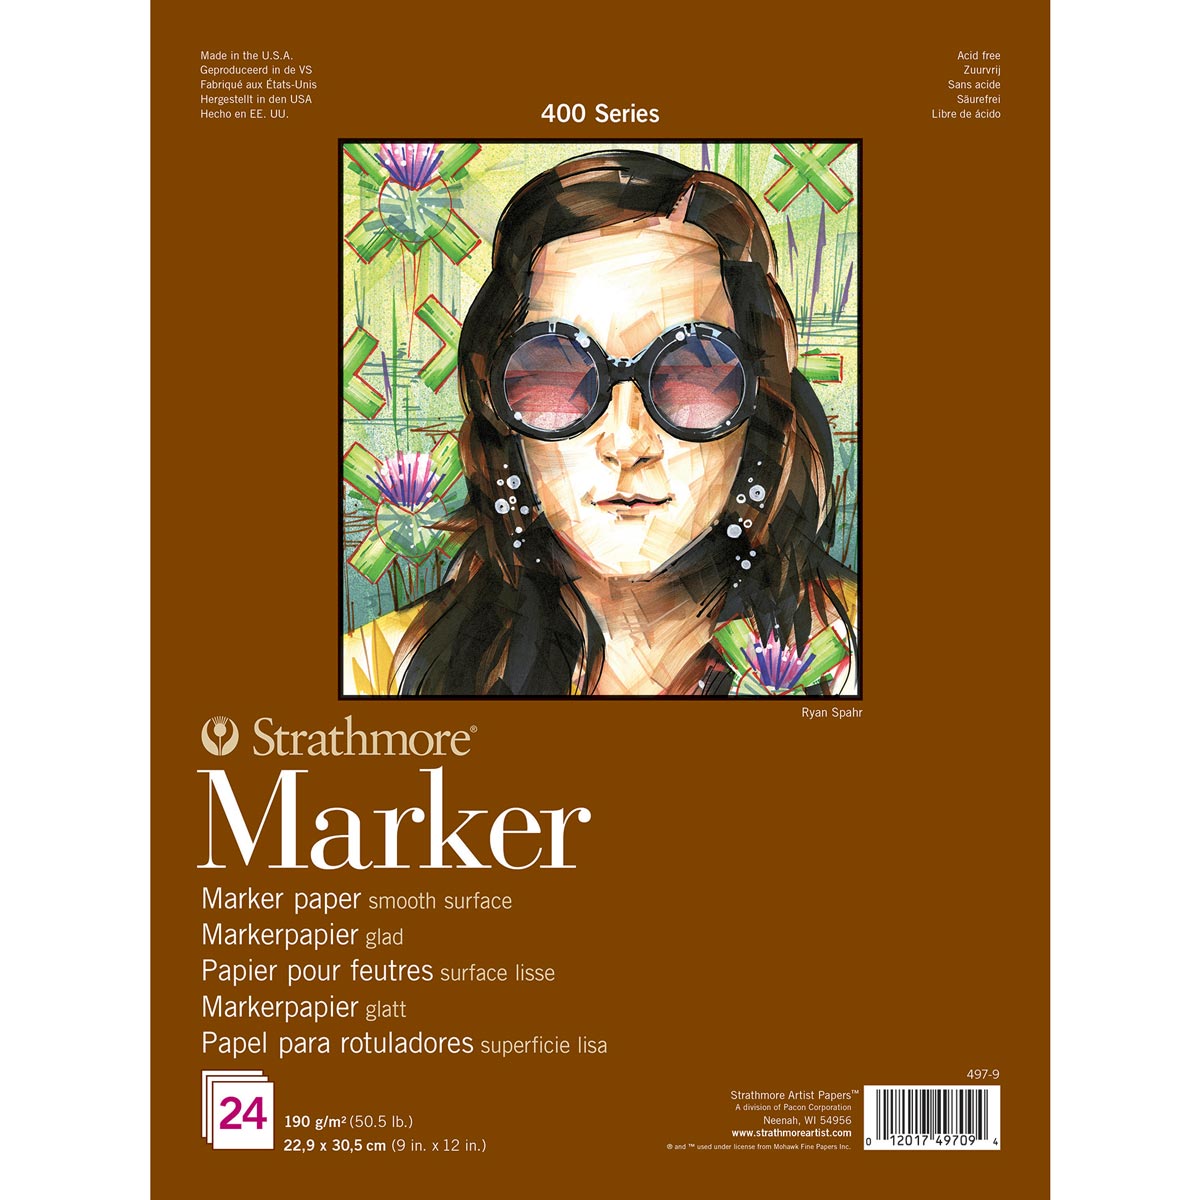 Strathmore - 400 Marker Pad 190gsm 9x12 "24 feuilles